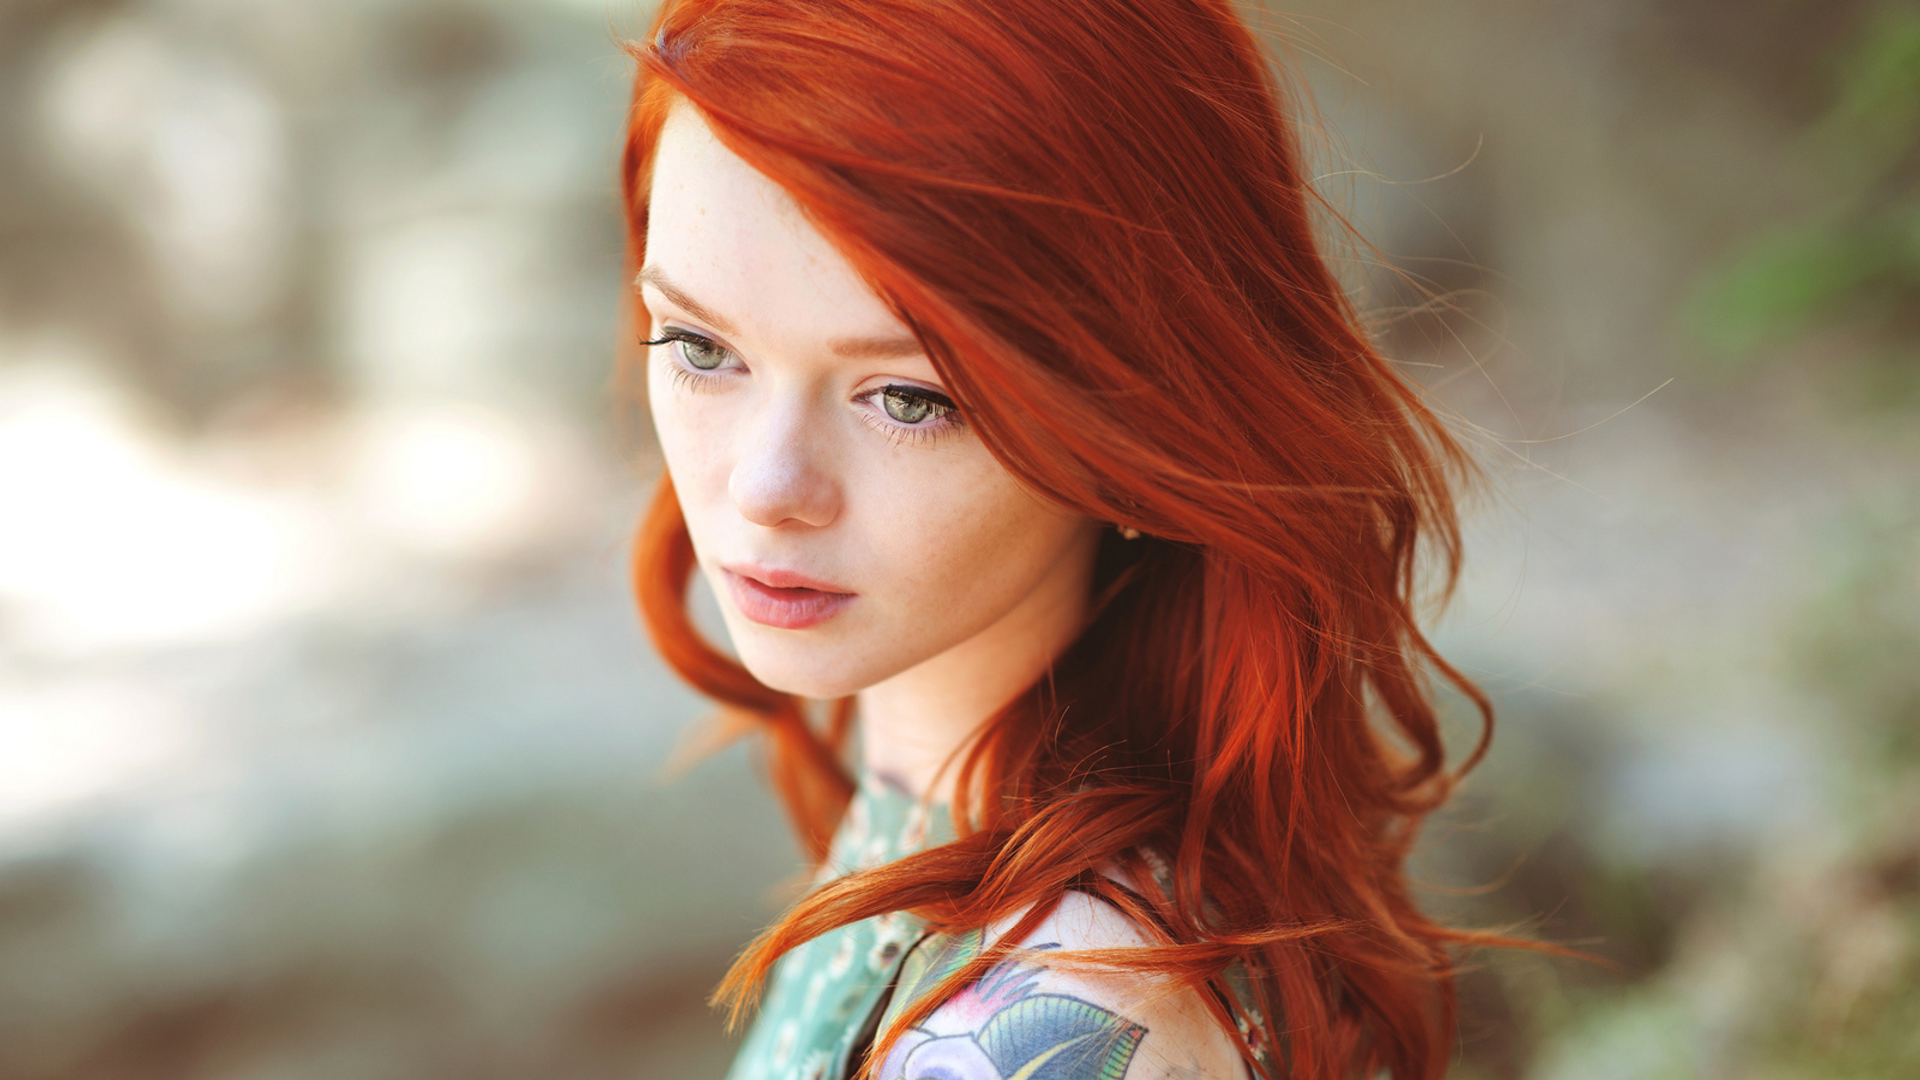 People 1920x1080 redhead Lass Suicide women Suicide Girls inked girls face looking into the distance dyed hair pornstar women outdoors outdoors Scottish Women British British women scottish cropped closeup